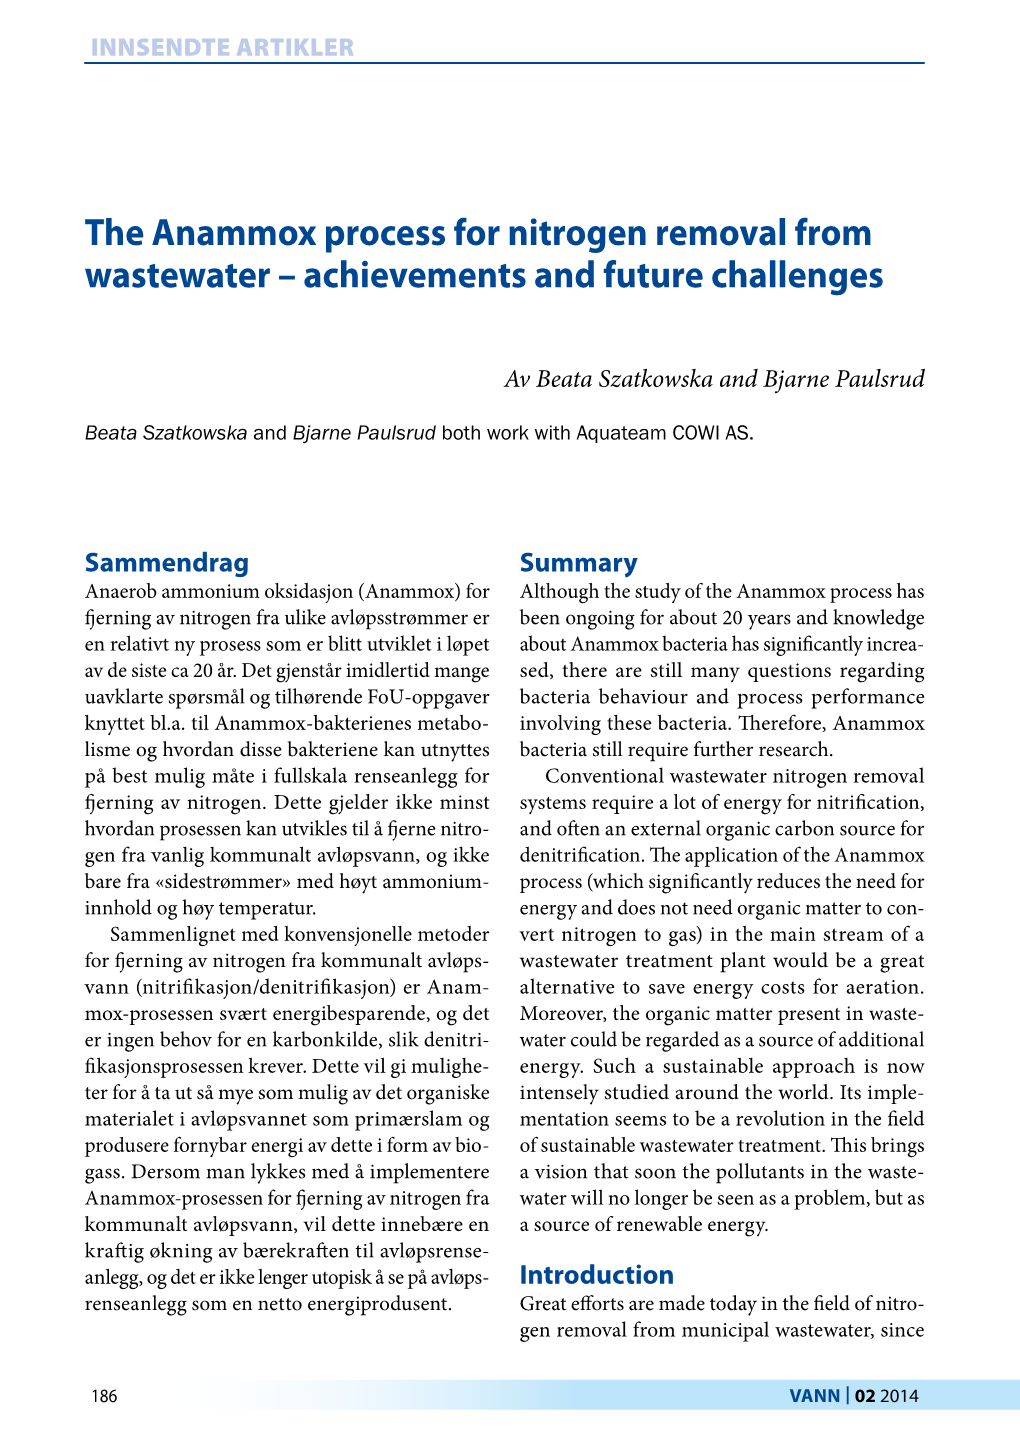 The Anammox Process for Nitrogen Removal from Wastewater – Achievements and Future Challenges